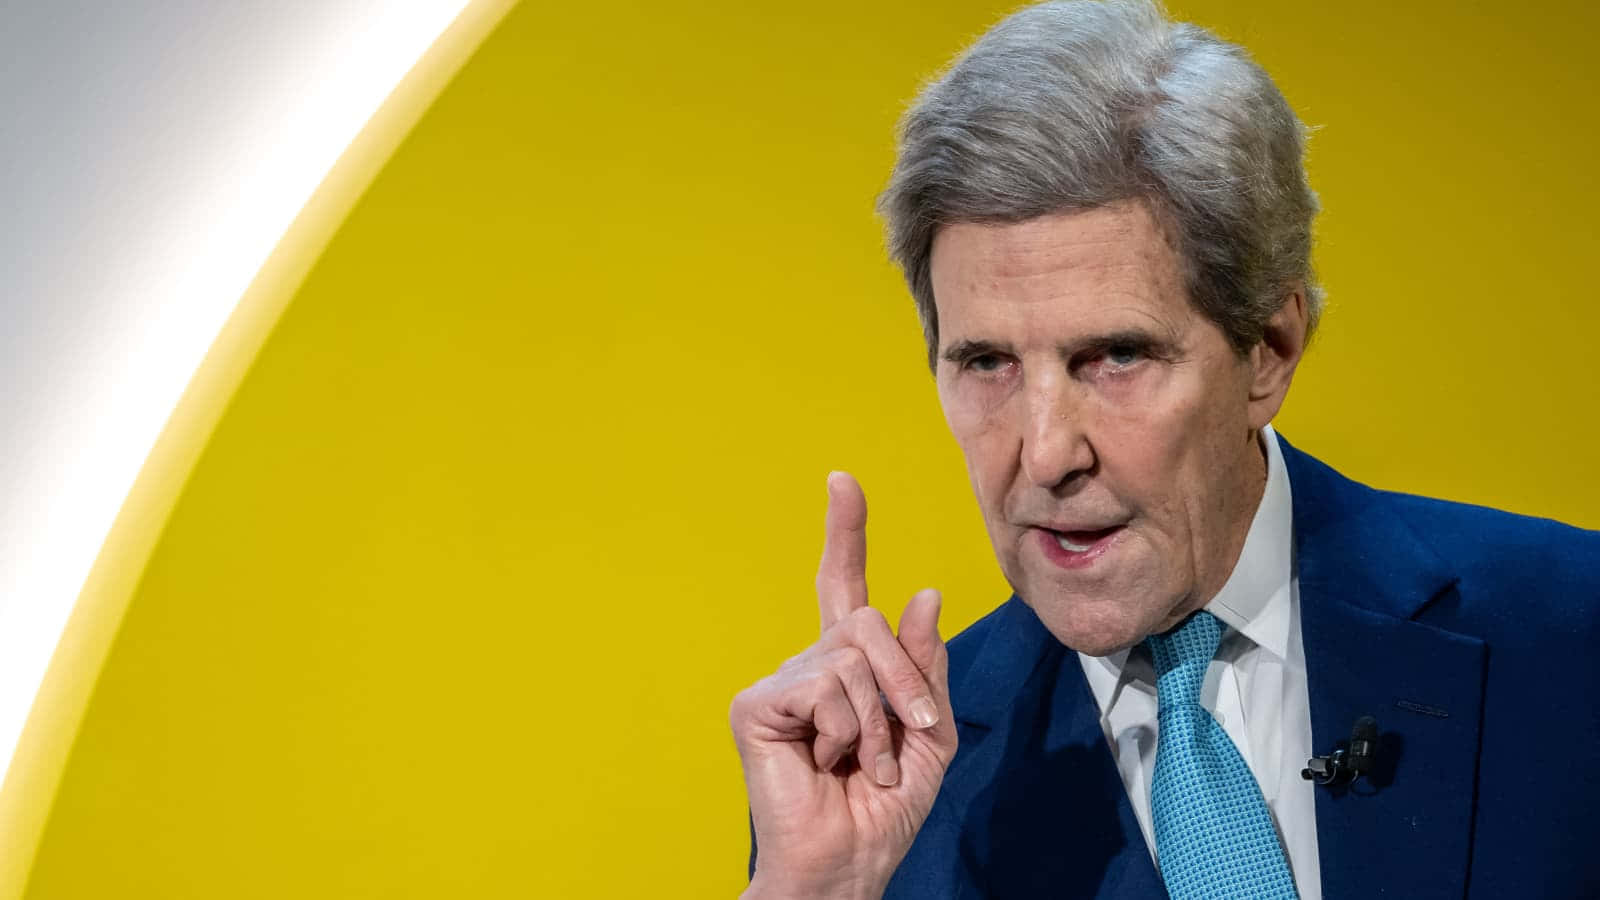 John Kerry With His Index Finger Pointing Upward